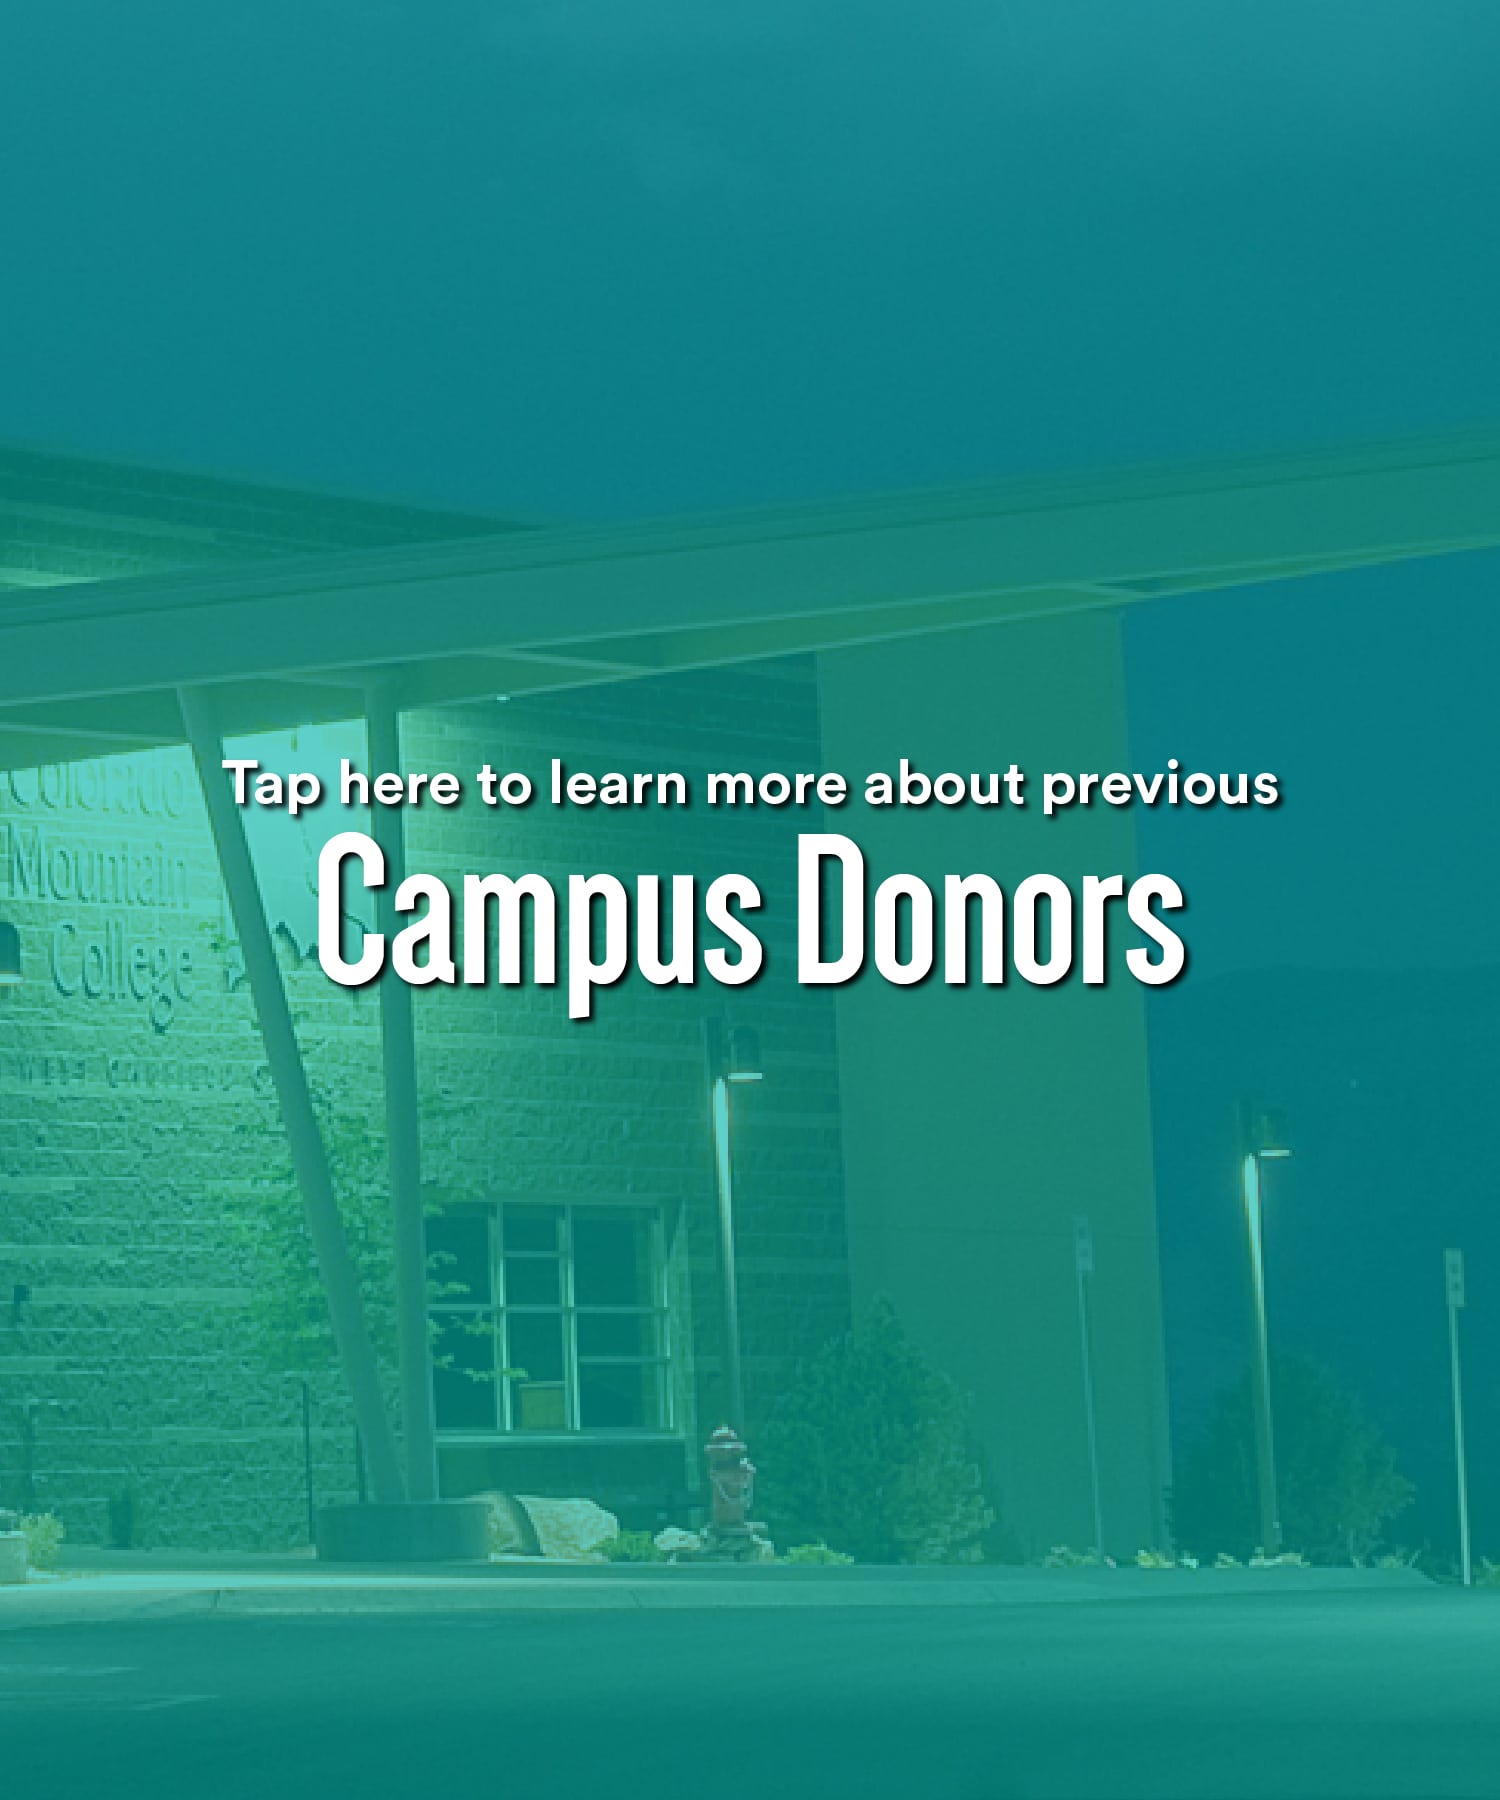 Photo of the CMC Rifle Campus with text that reads "Tap here to learn more about previous Campus Donors."